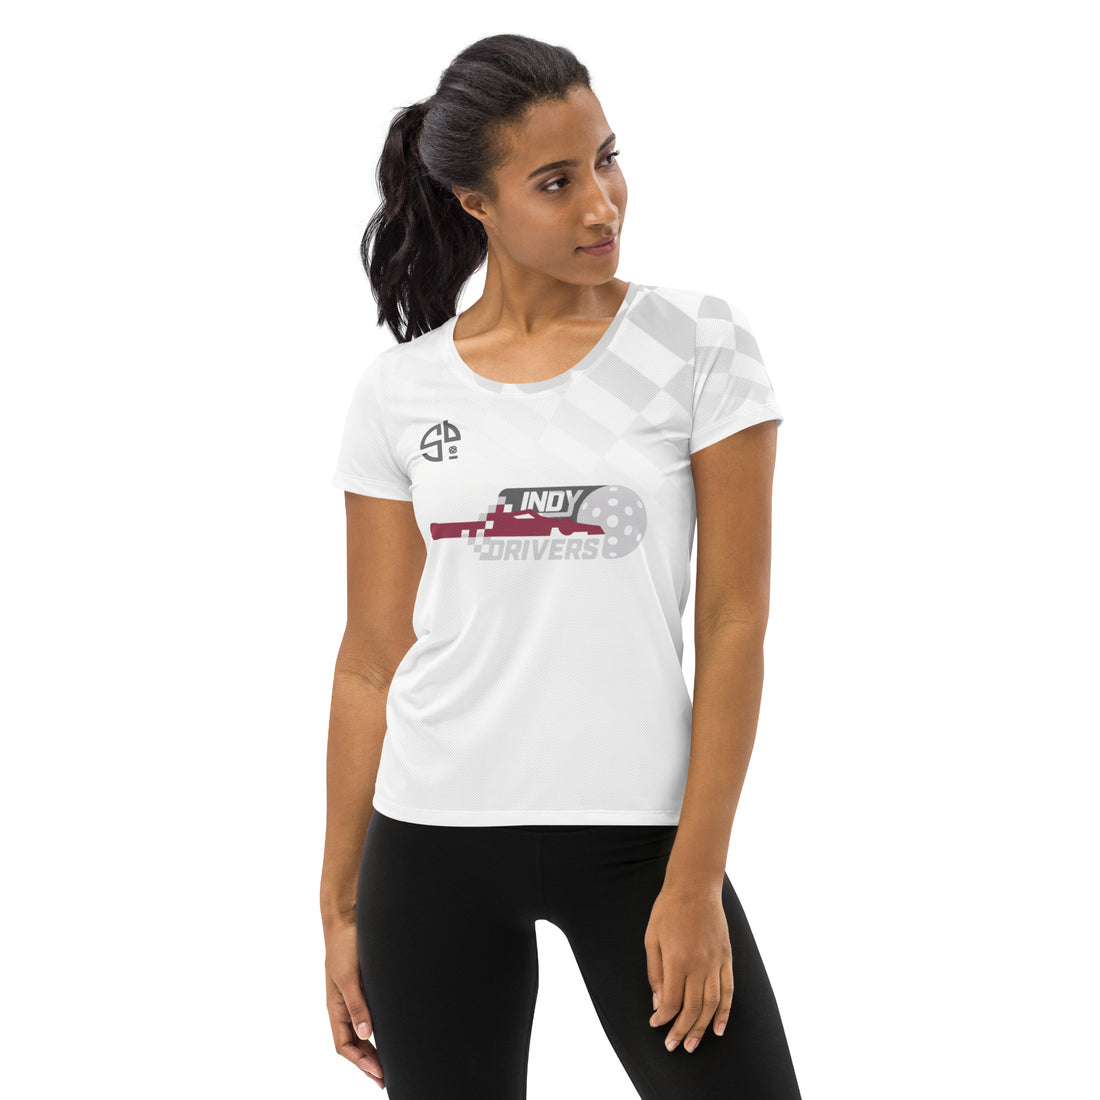 "Nagrani 23" Indy Drivers™ Replica Women's Pickleball Tournament Athletic Shirt White - One of a kind! Size S